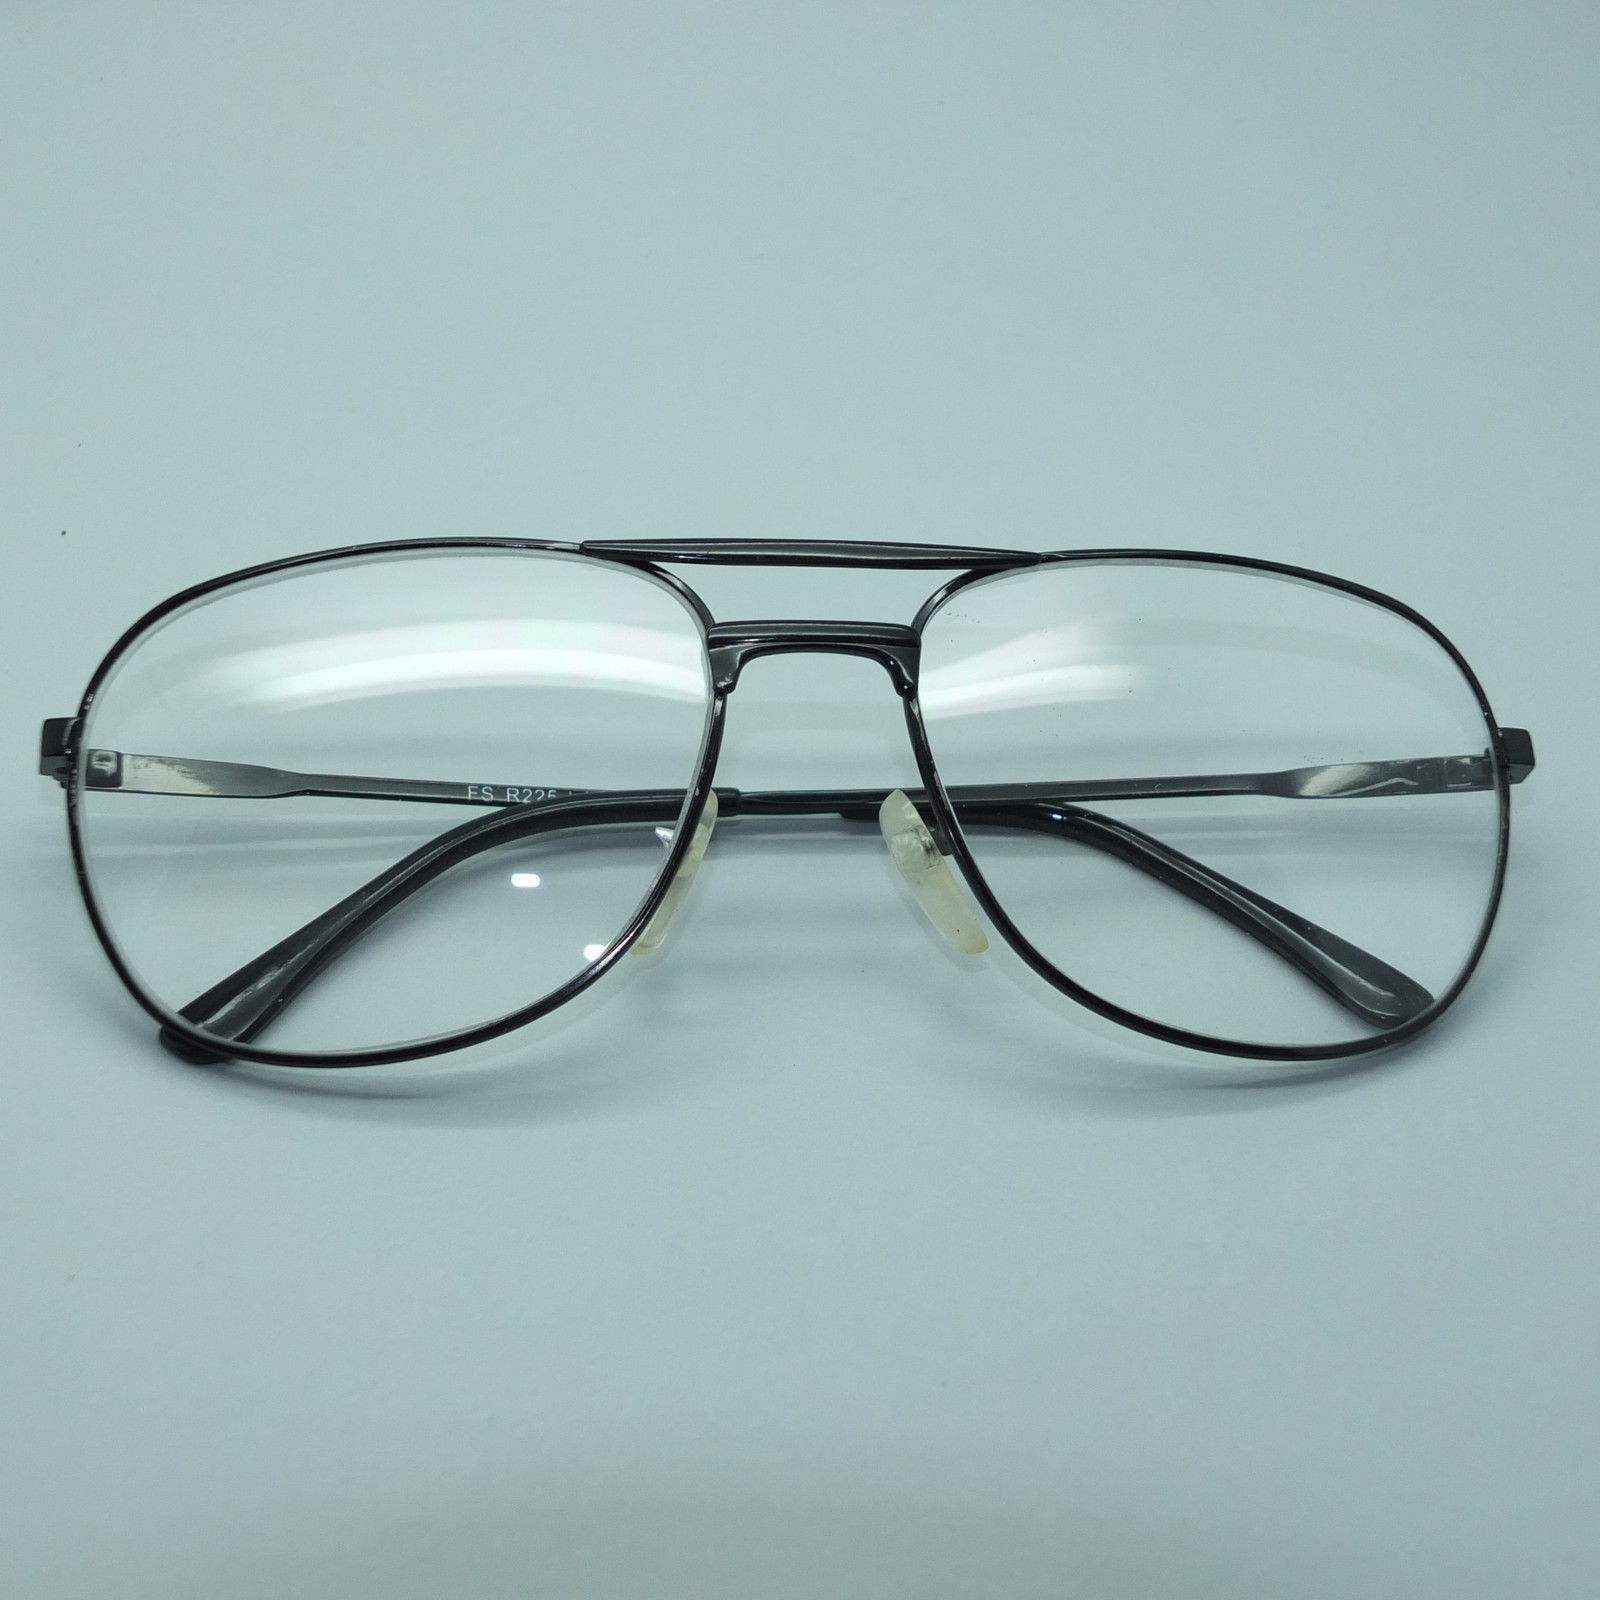 Aviator Reading Glasses +1.25 Large Lens and 50 similar items